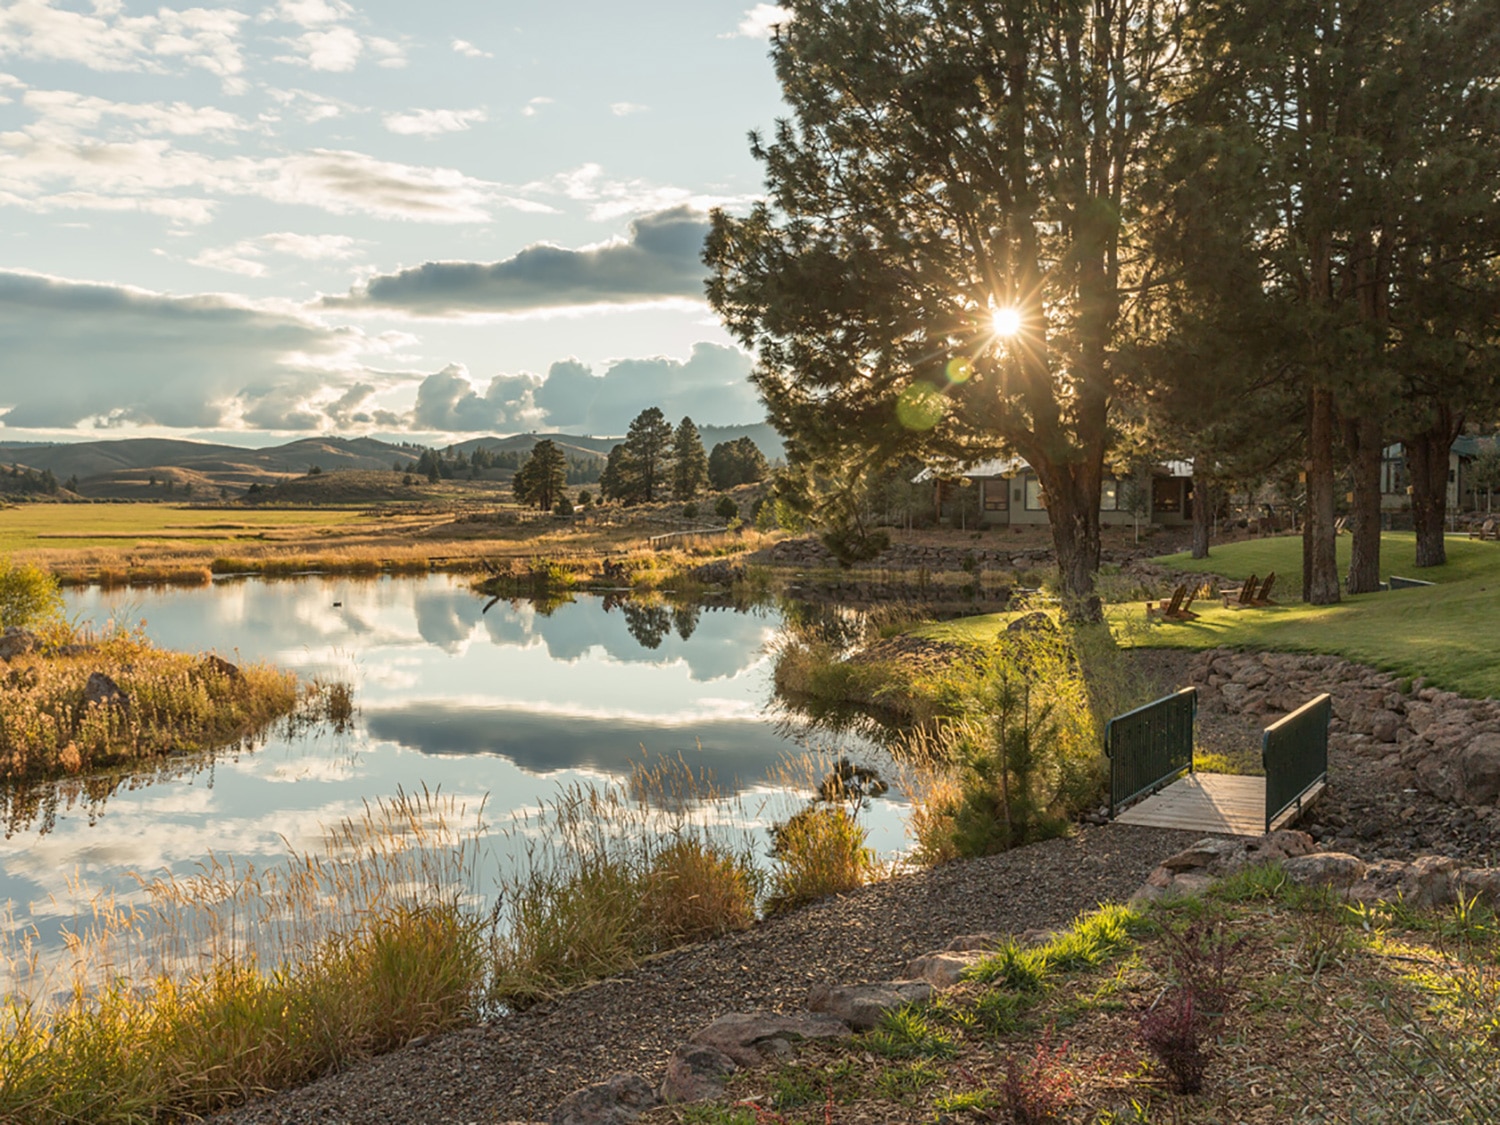 Lakeside seating at Silvies Valley Ranch in Oregon, which is home to a variety of celebrated golf courses and exciting outdoor activities.